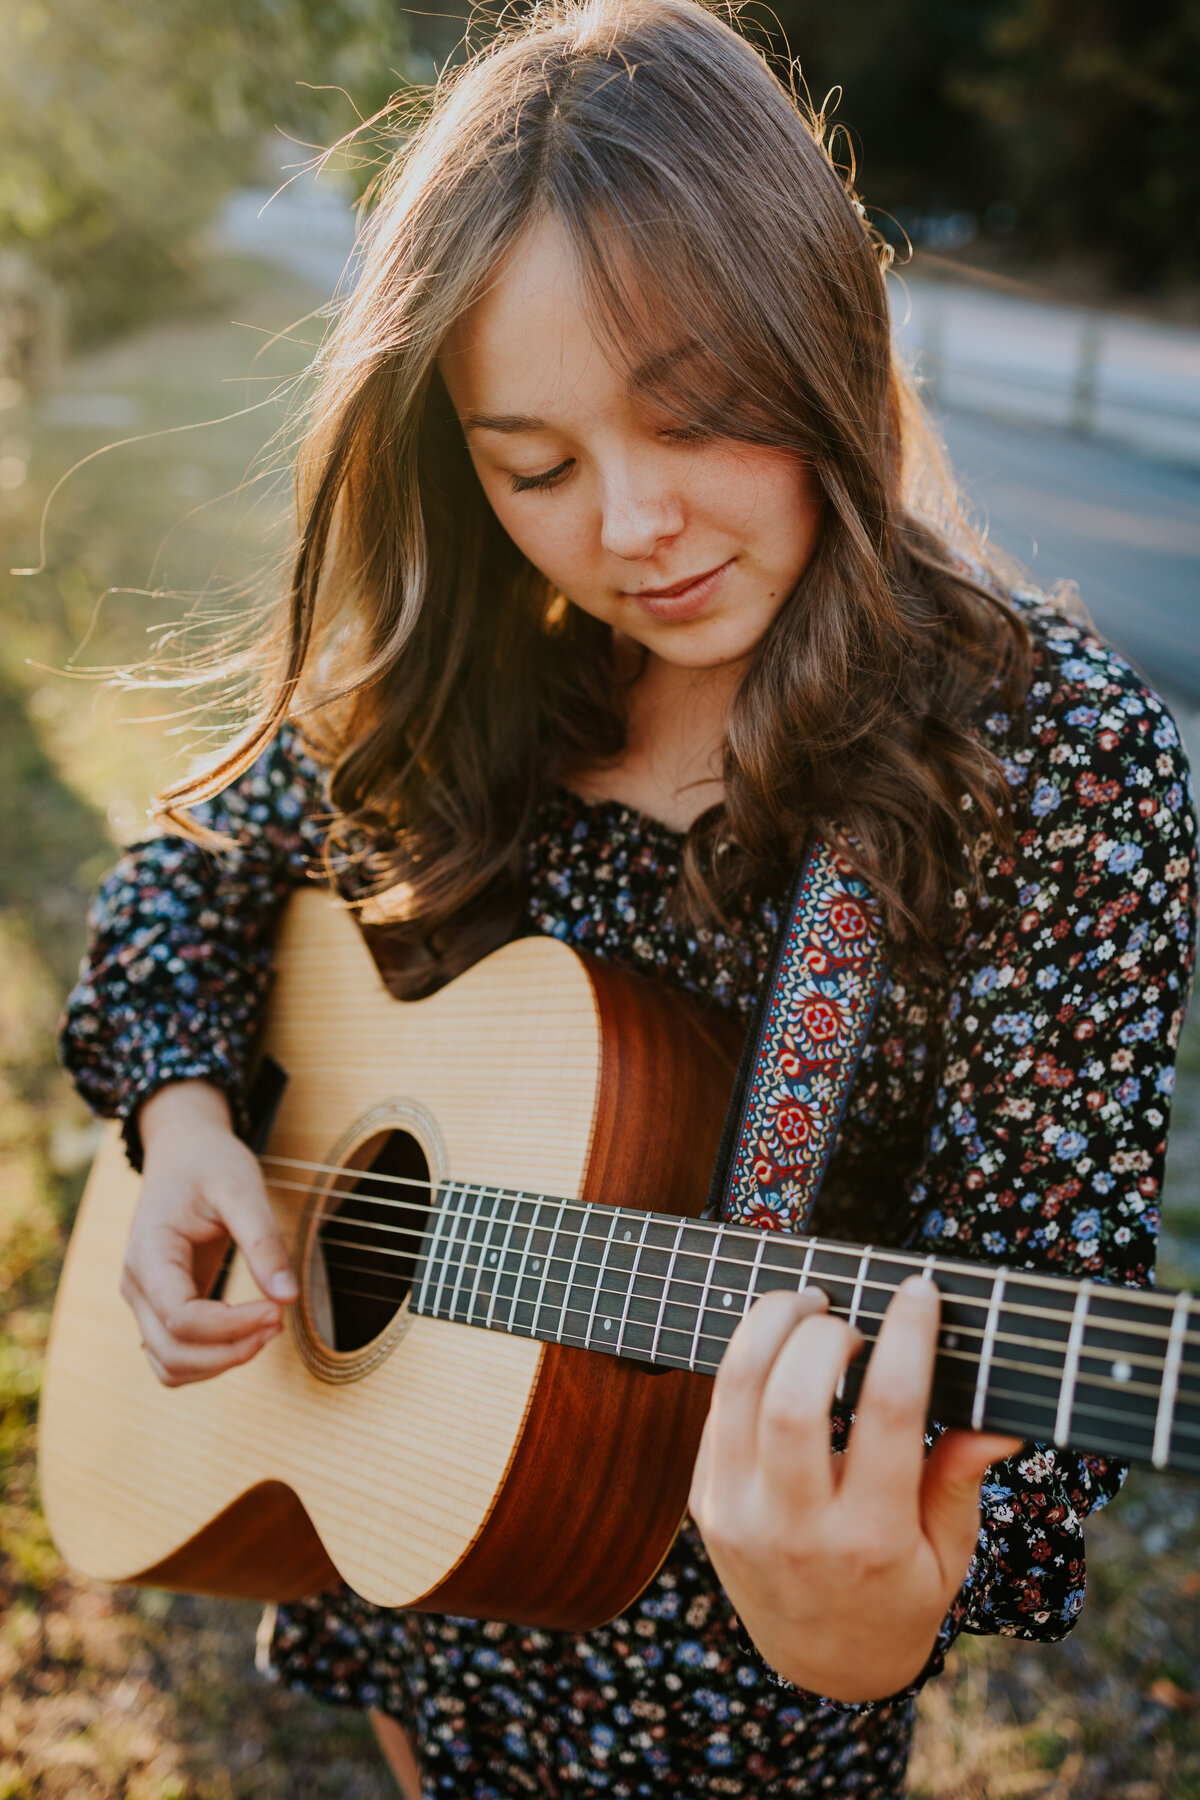 Young woman looks down at guitar as wind tousles her hair.